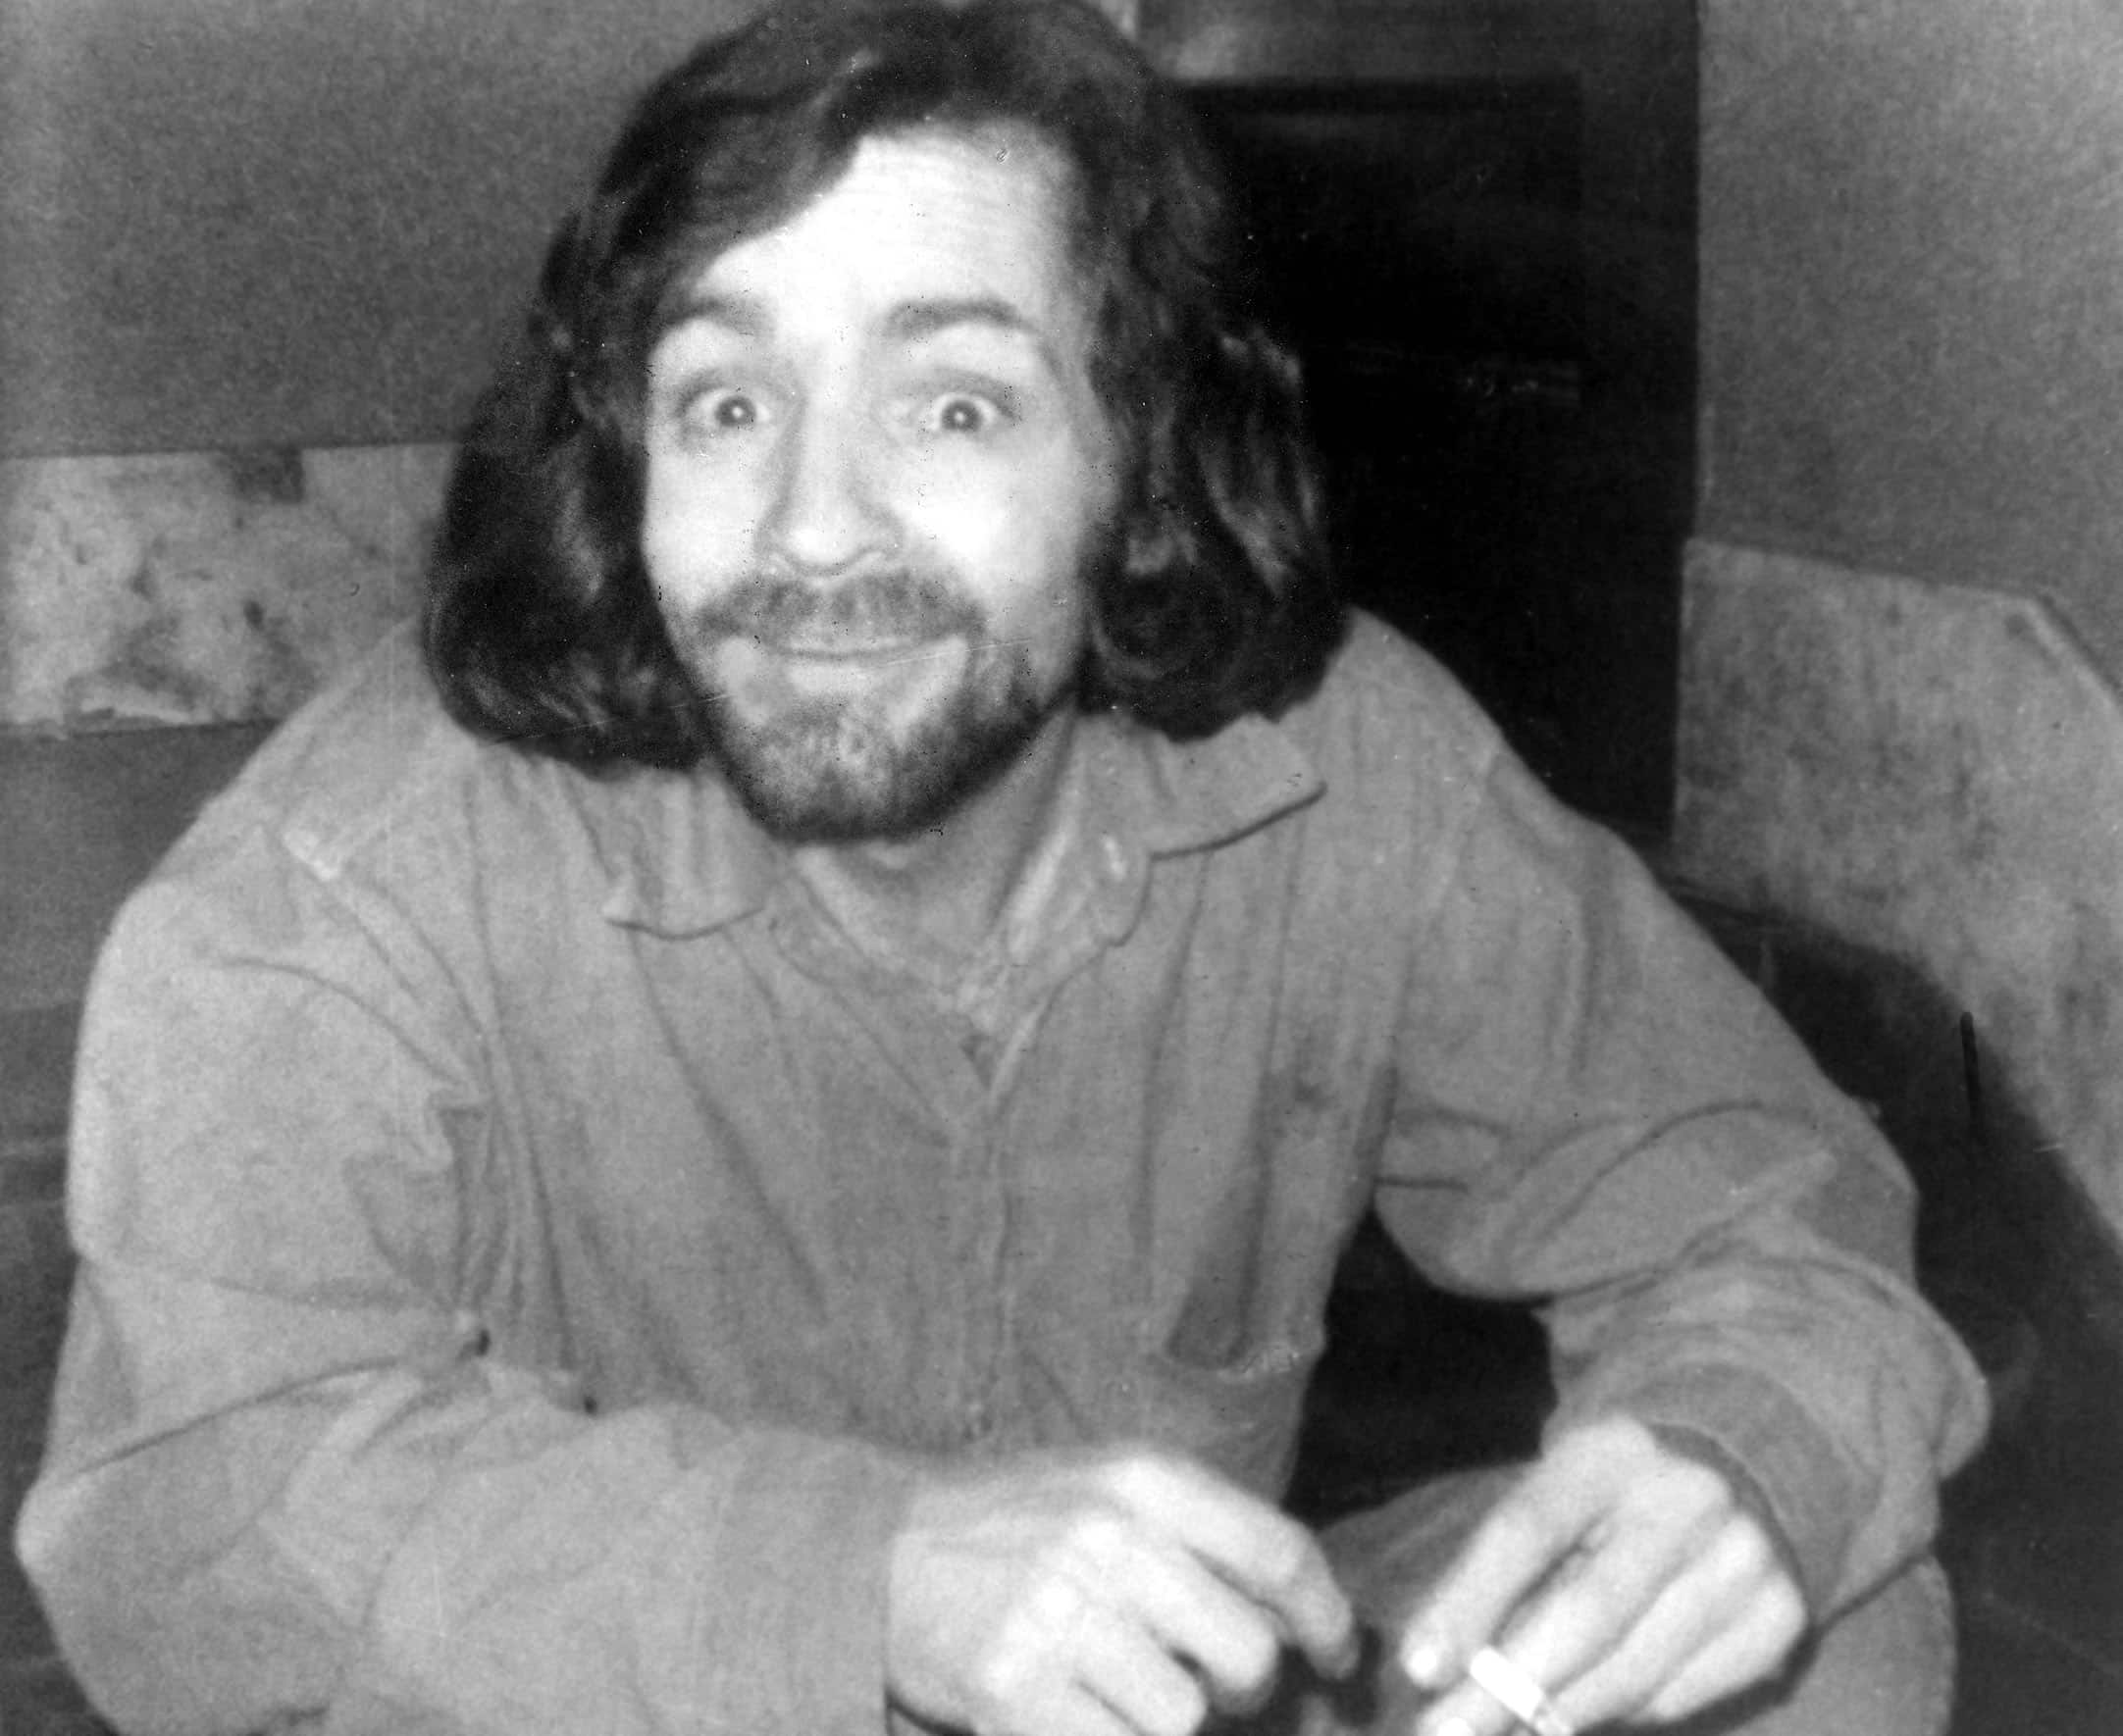 CHARLES MANSON, exact date unknown 